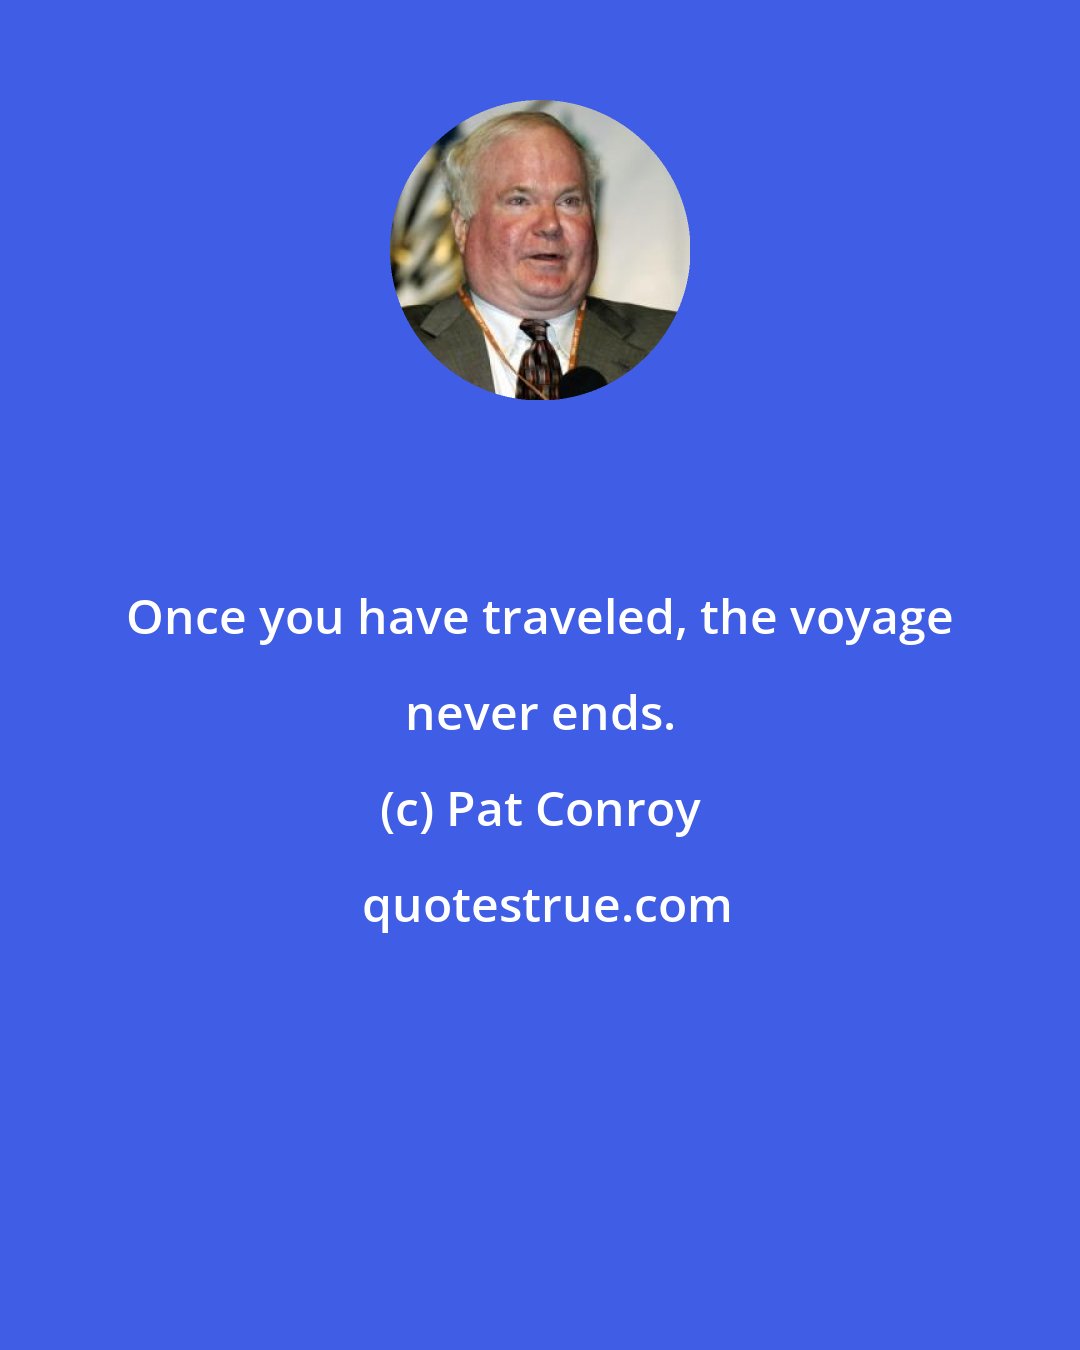 Pat Conroy: Once you have traveled, the voyage never ends.